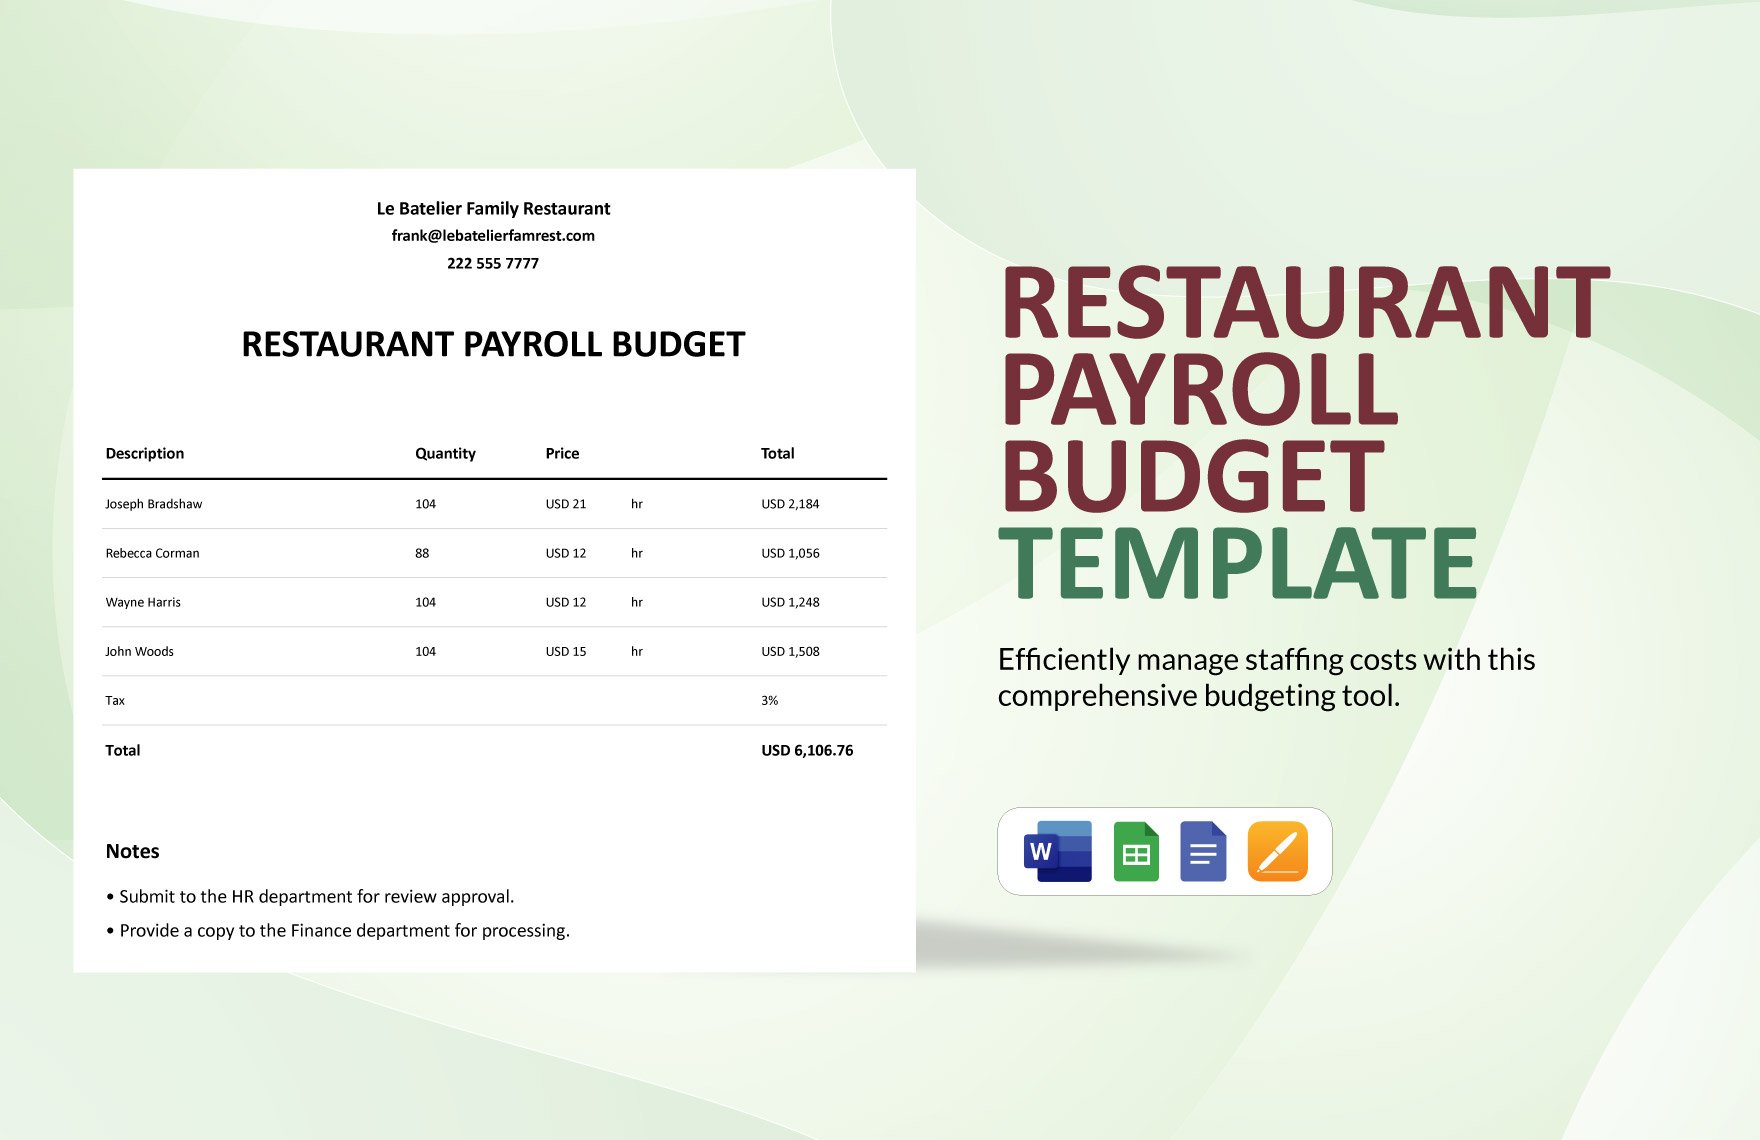 Restaurant Payroll Budget Template in Word, Google Docs, Google Sheets, Apple Pages